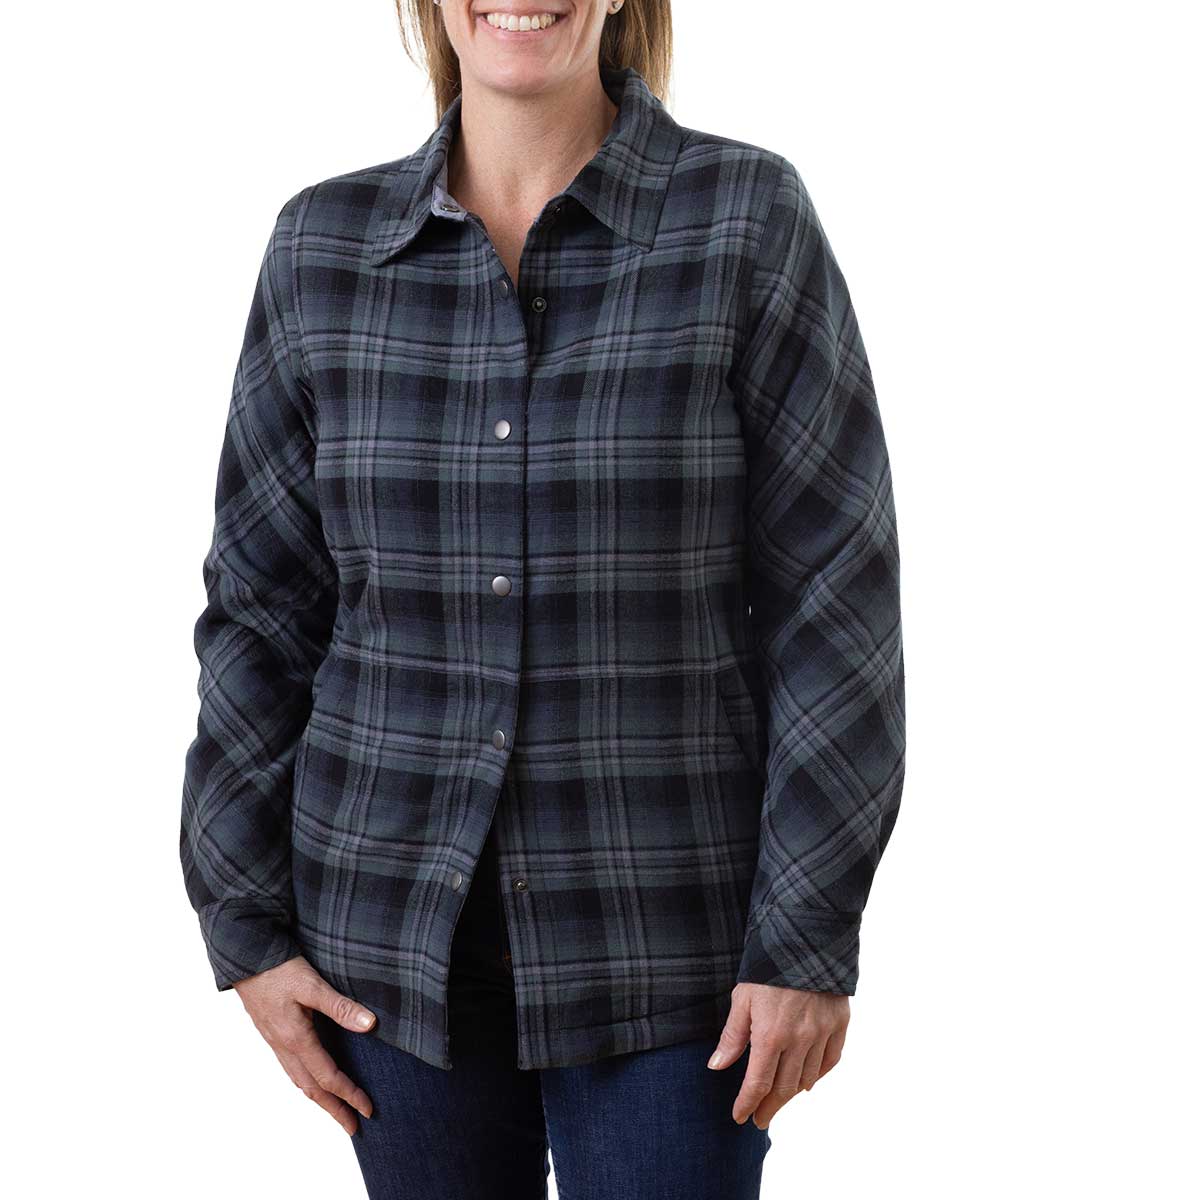 Sugar River by Gemplers Women's Sherpa-Lined Shirt Jacket